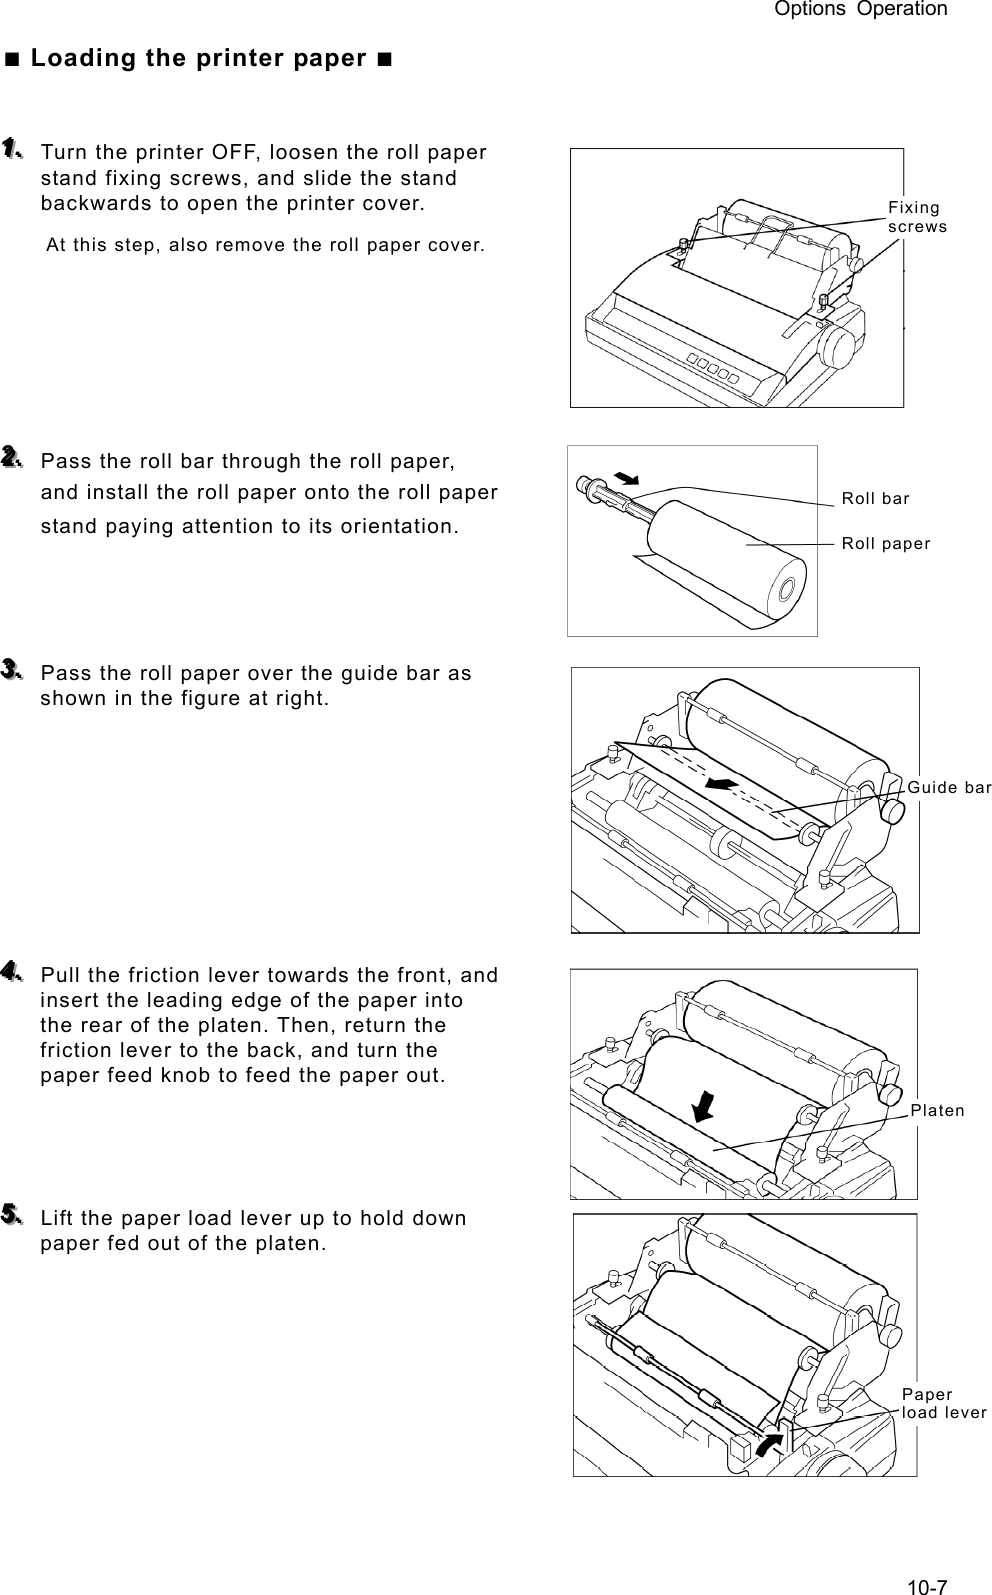 Options Operation 10-7 ■ Loading the printer paper ■  111...   Turn the printer OFF, loosen the roll paper stand fixing screws, and slide the stand backwards to open the printer cover.   At this step, also remove the roll paper cover.        222...   Pass the roll bar through the roll paper, and install the roll paper onto the roll paper stand paying attention to its orientation.      333...   Pass the roll paper over the guide bar as shown in the figure at right.          444...   Pull the friction lever towards the front, and insert the leading edge of the paper into the rear of the platen. Then, return the friction lever to the back, and turn the paper feed knob to feed the paper out.      555...   Lift the paper load lever up to hold down paper fed out of the platen.        Fixing screws Roll bar Roll paper Guide barPlaten Paper load lever